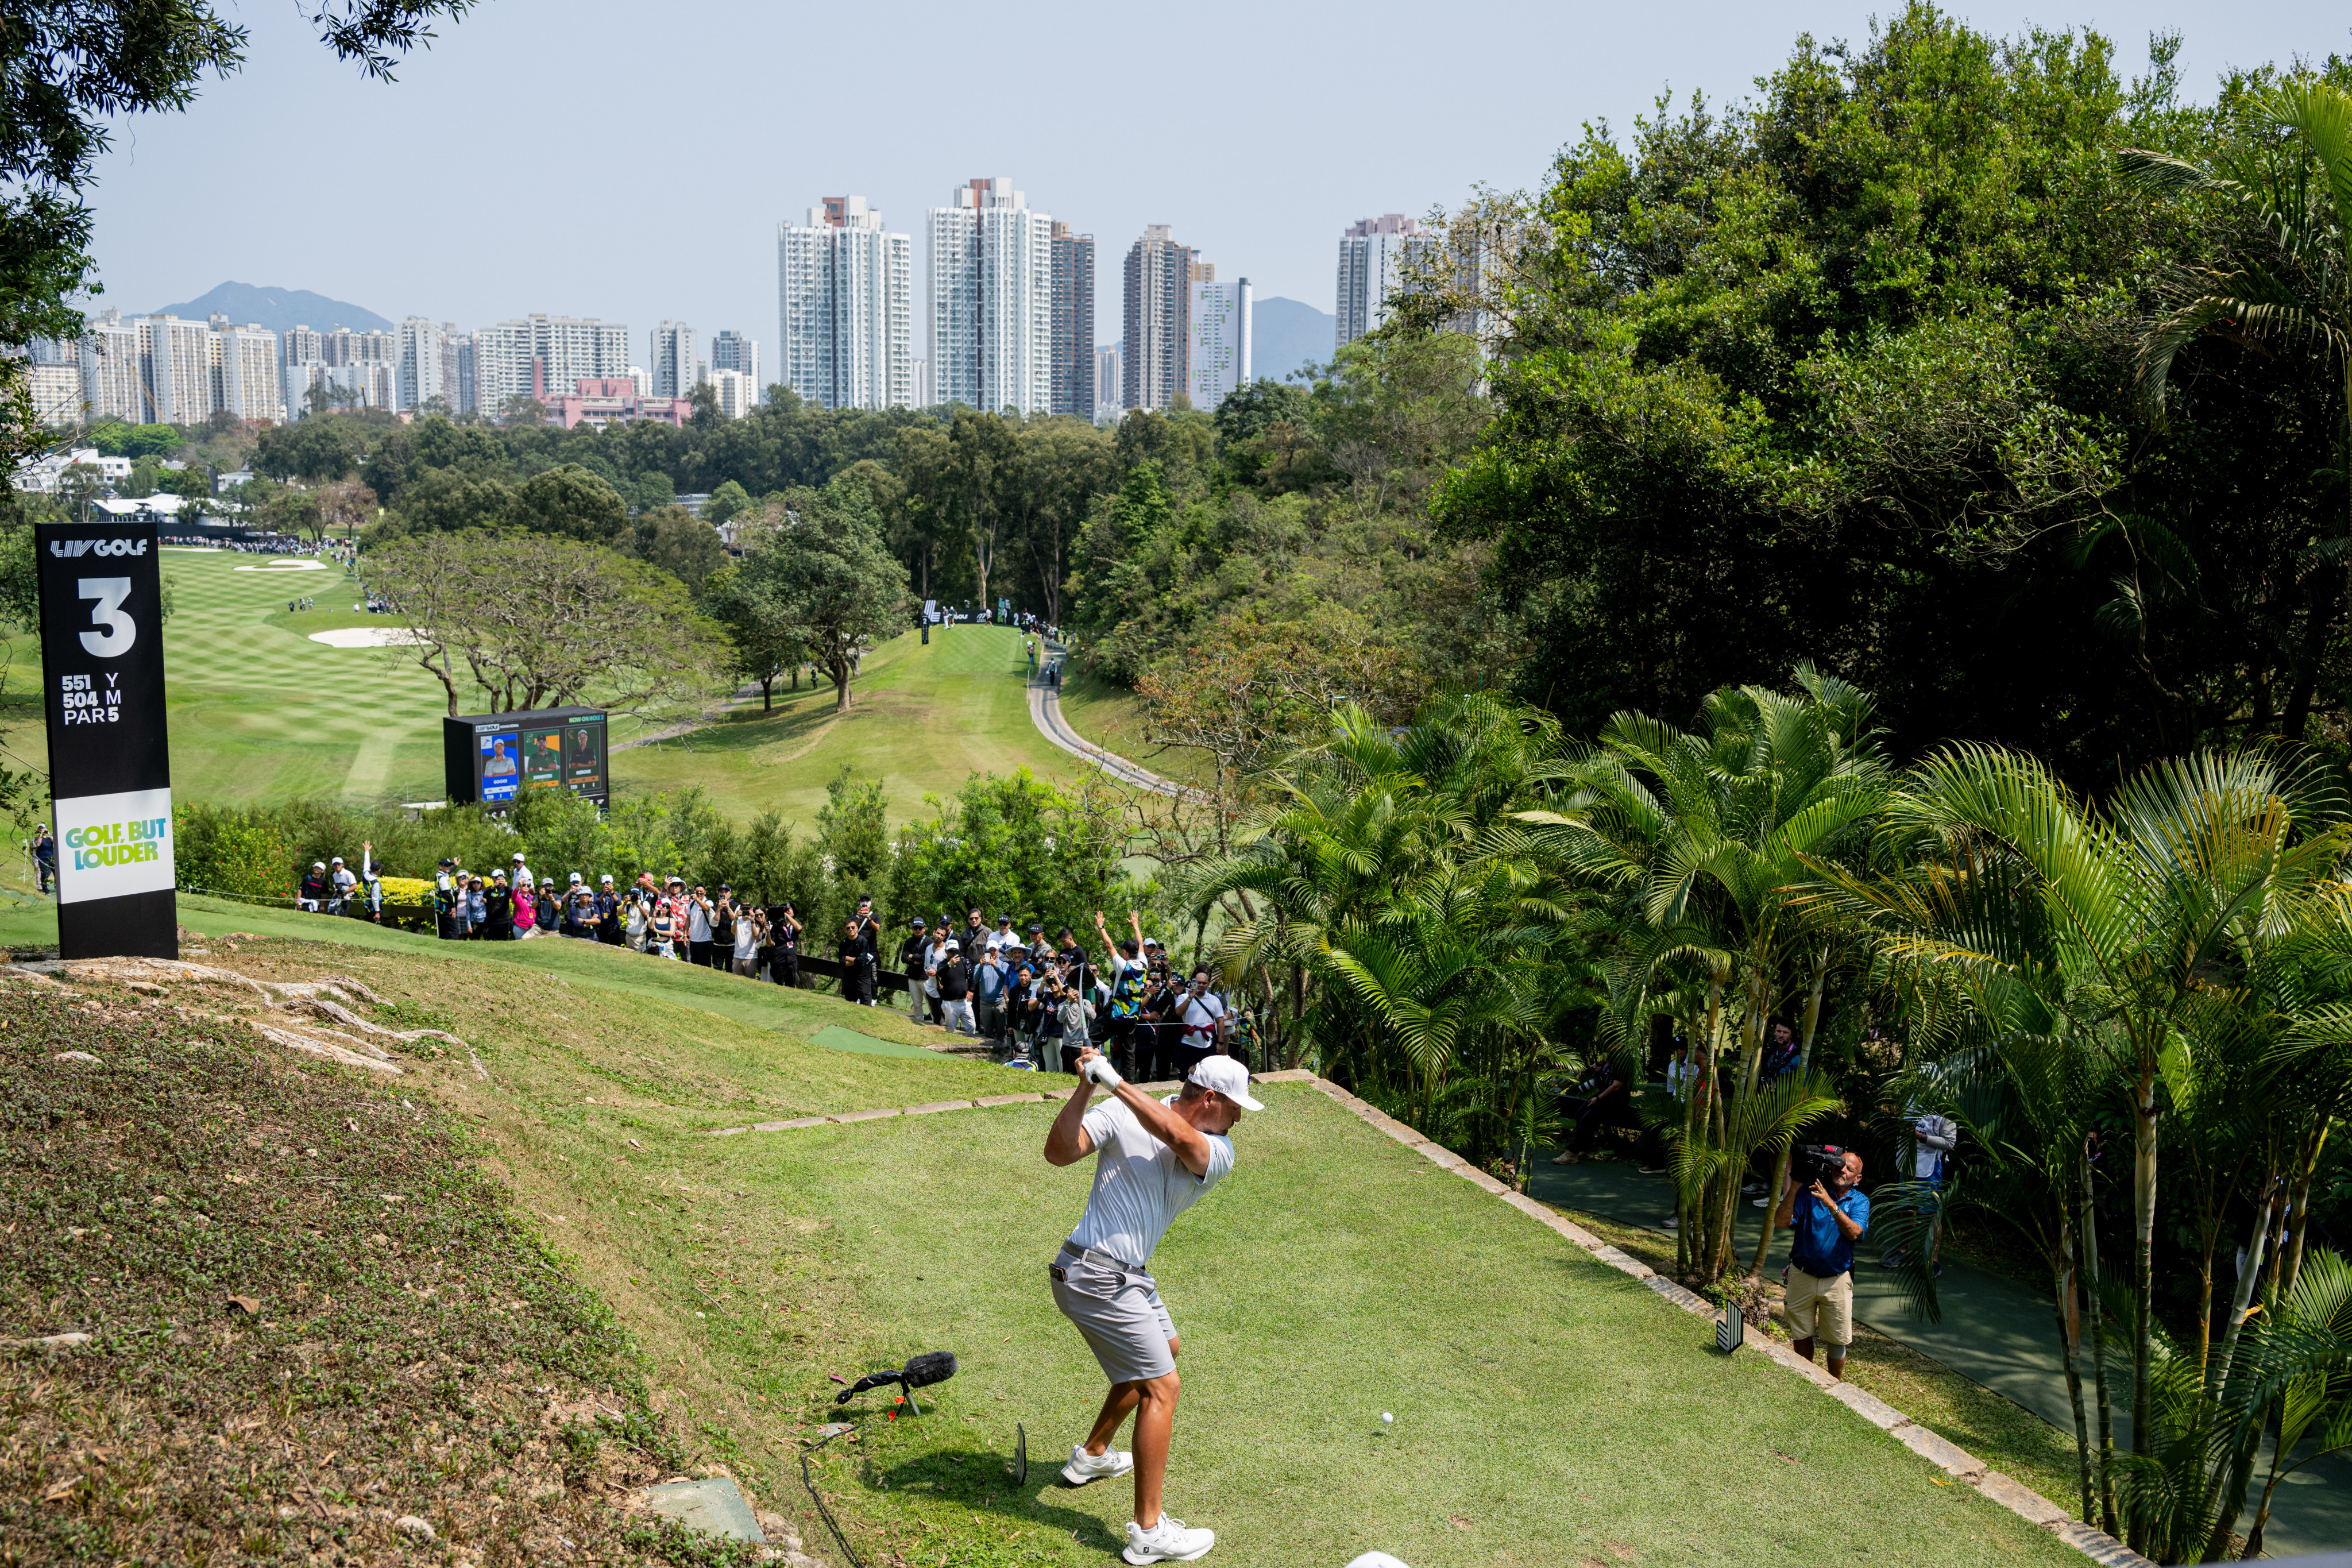 Bryson DeChambeau, captain of the Crushers GC team, at the third tee during the first round of LIV Golf Hong Kong at the Hong Kong Golf Club Fanling on Friday. Photo: Charles Laberge/LIV Golf